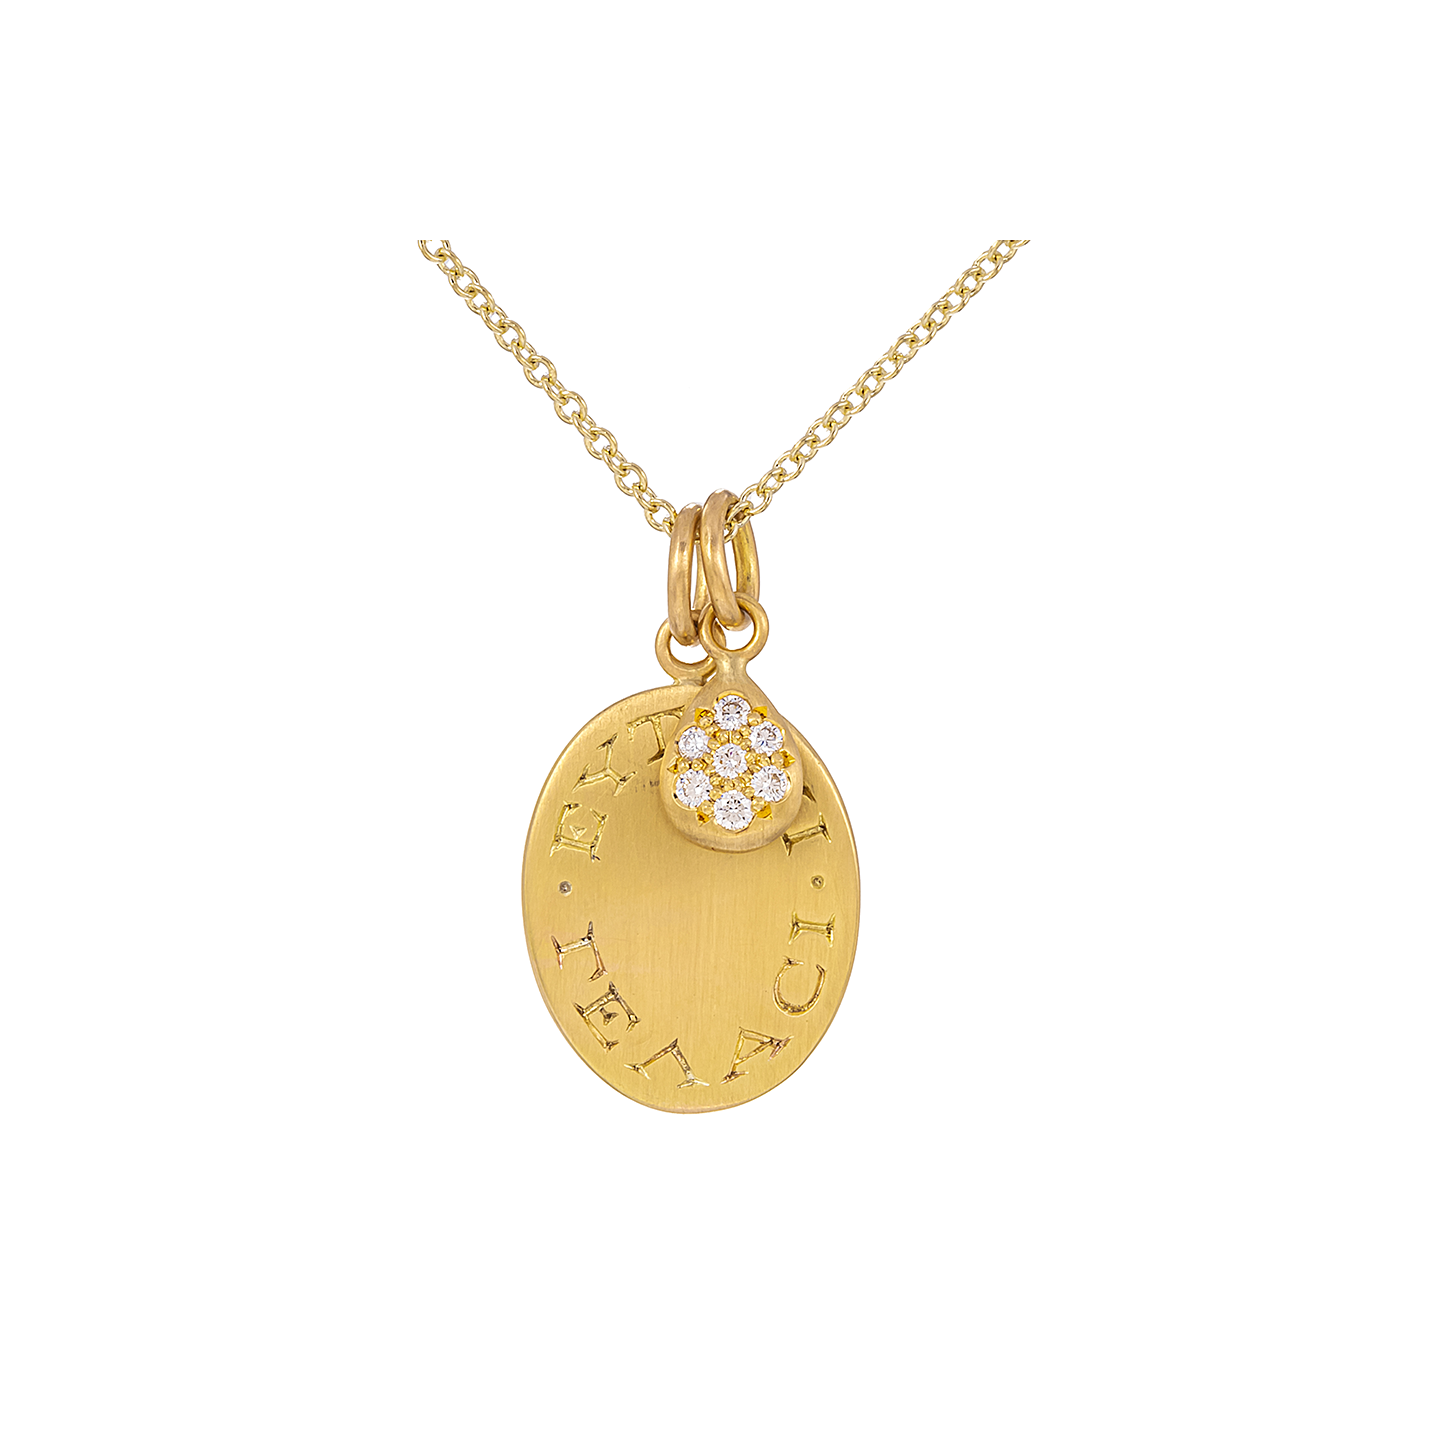 Caroline Ellen Engraved Oval Pendant with Pave Tear Drop "May You have Luck & Laughter"